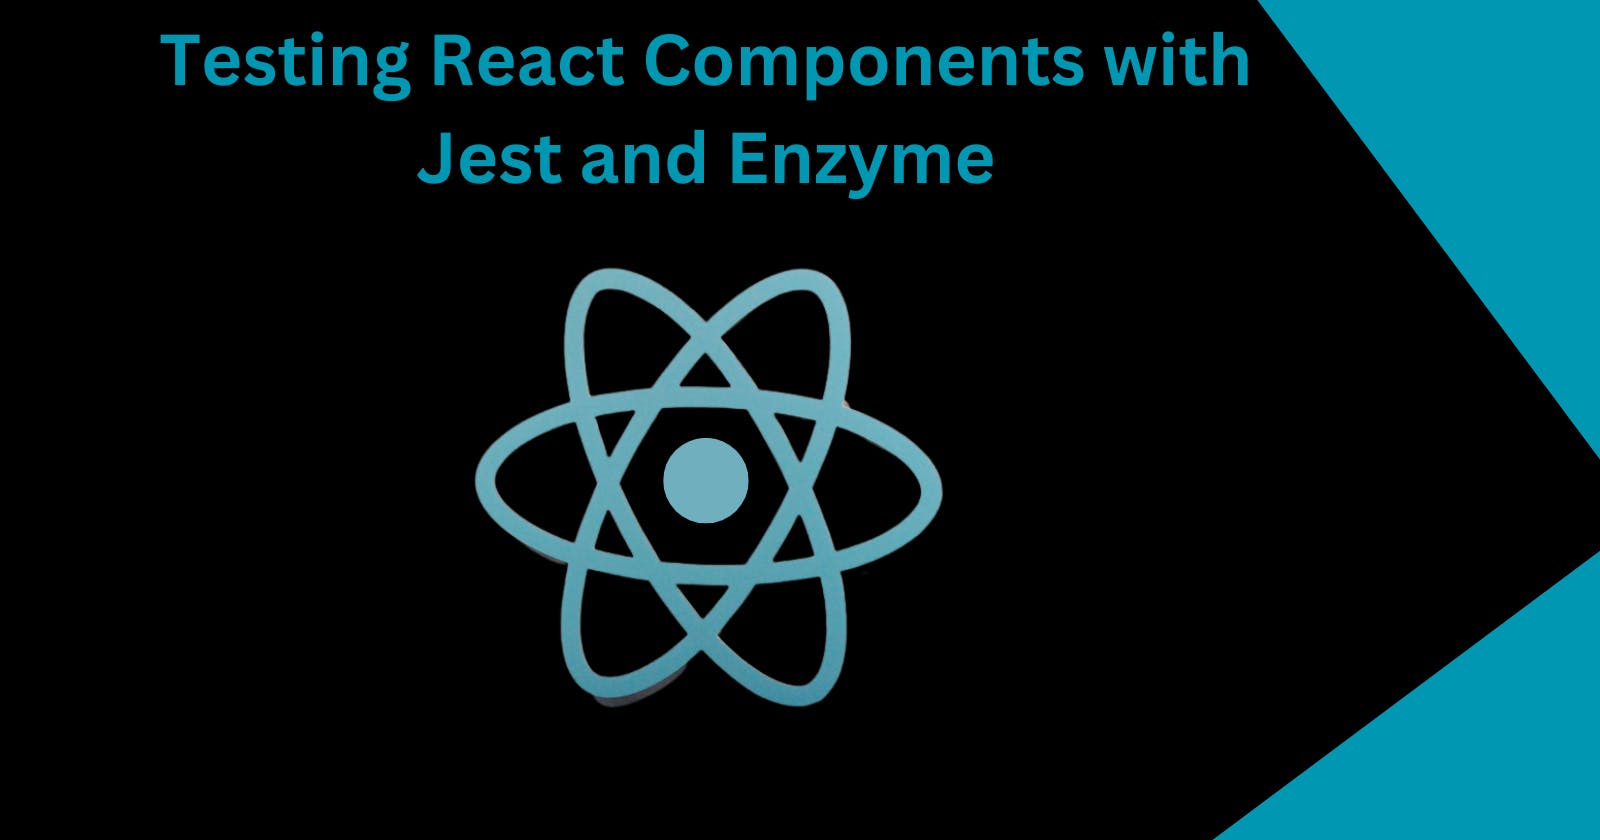 Testing React Components with Jest and Enzyme